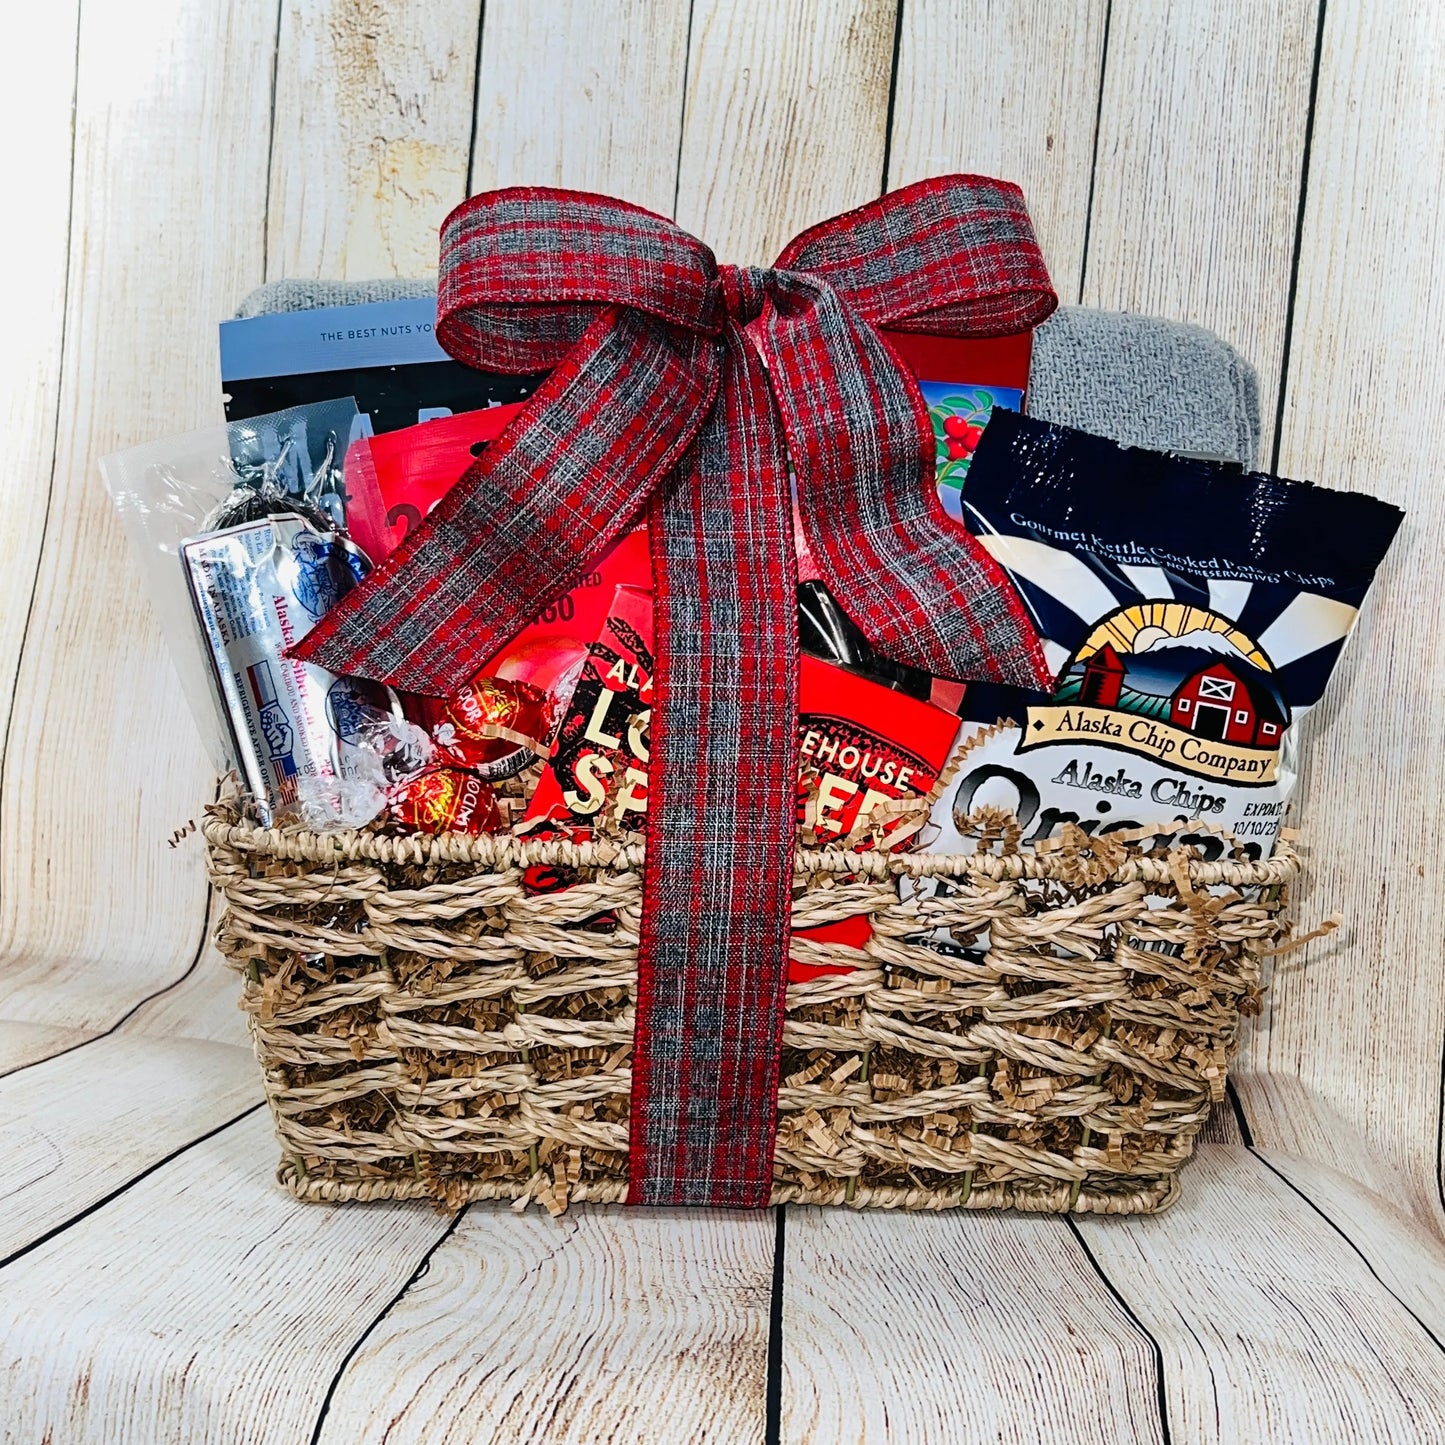 Warm Thoughts - The Gifted Basket